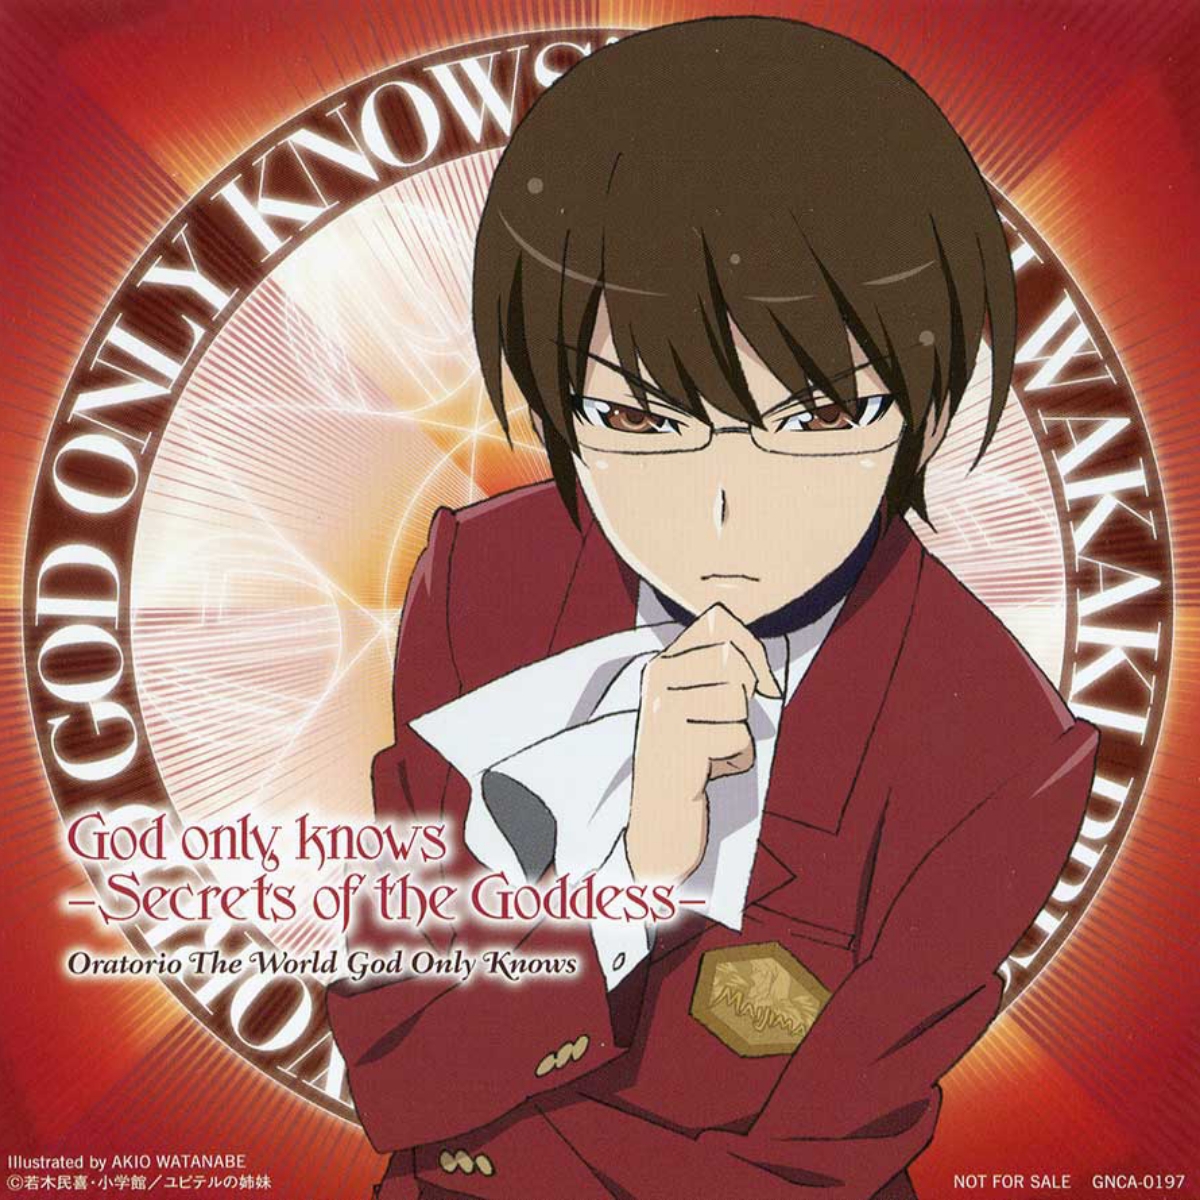 Oratorio The World God Only Knows - God only knows -Secrets of the Goddess-